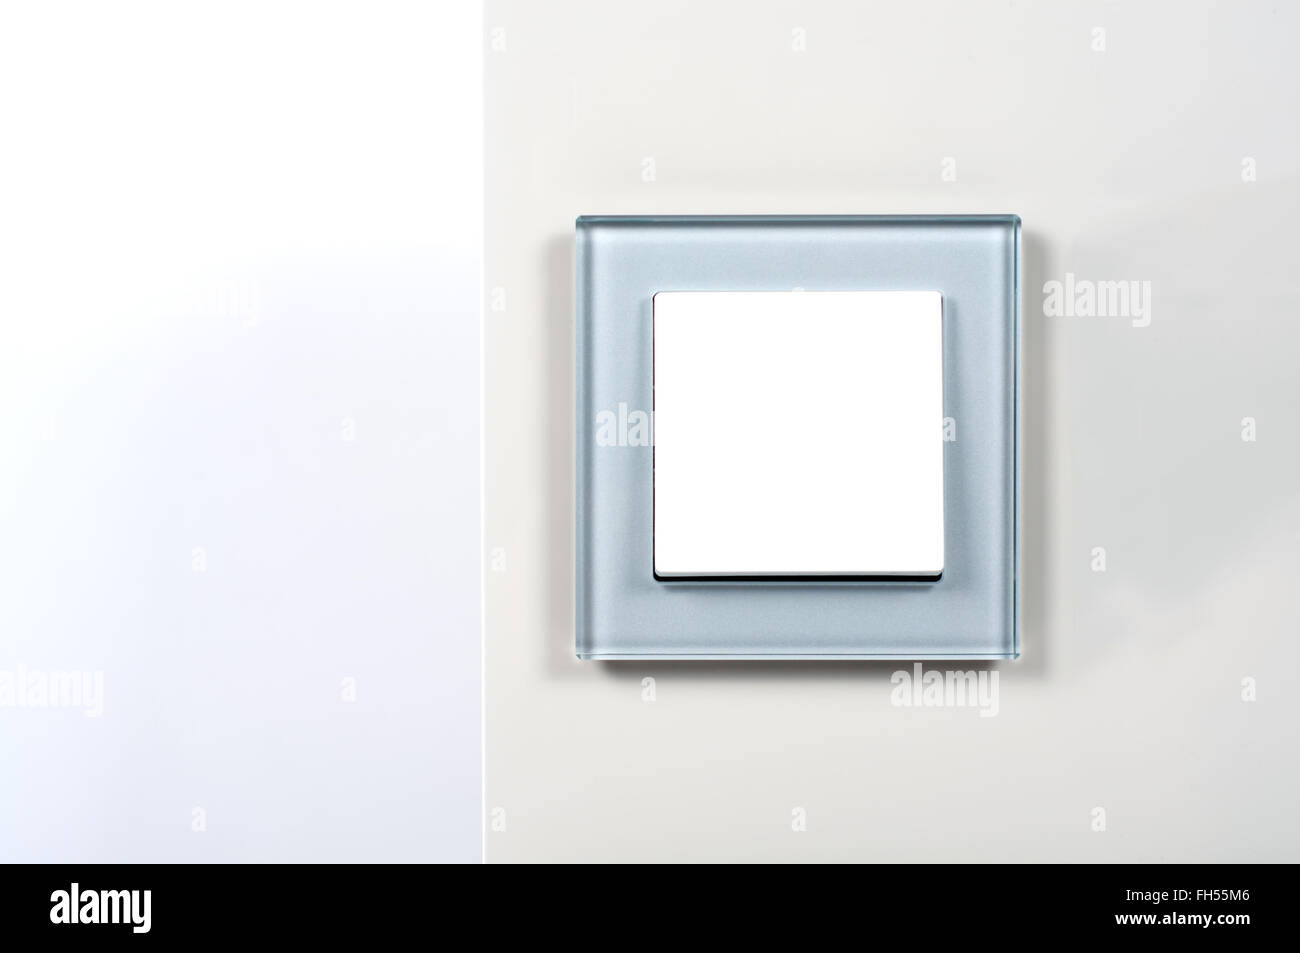 light switch with silver glass frame on the wall Stock Photo